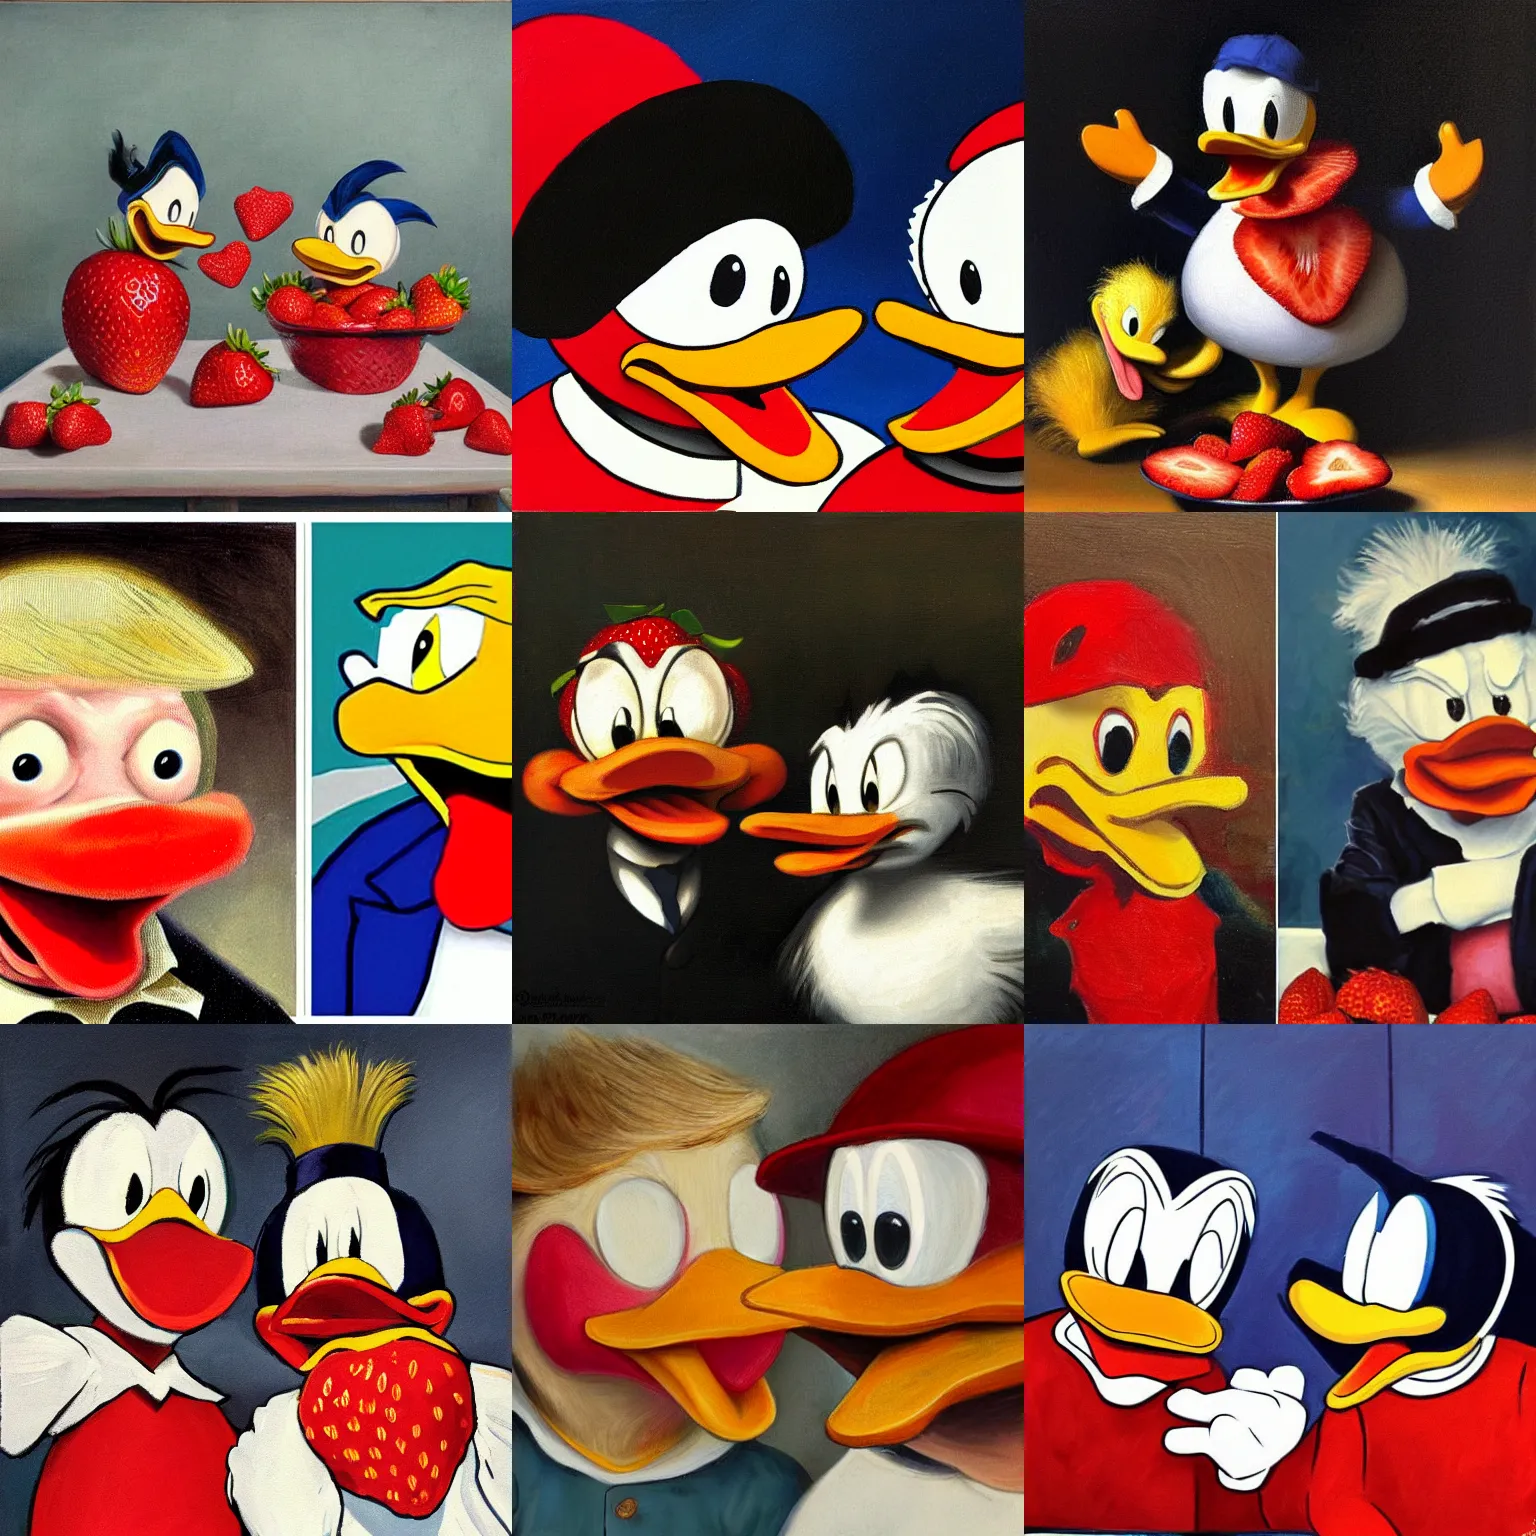 Prompt: donald trump and donald duck eating strawberries, painted in the style of rembrandt